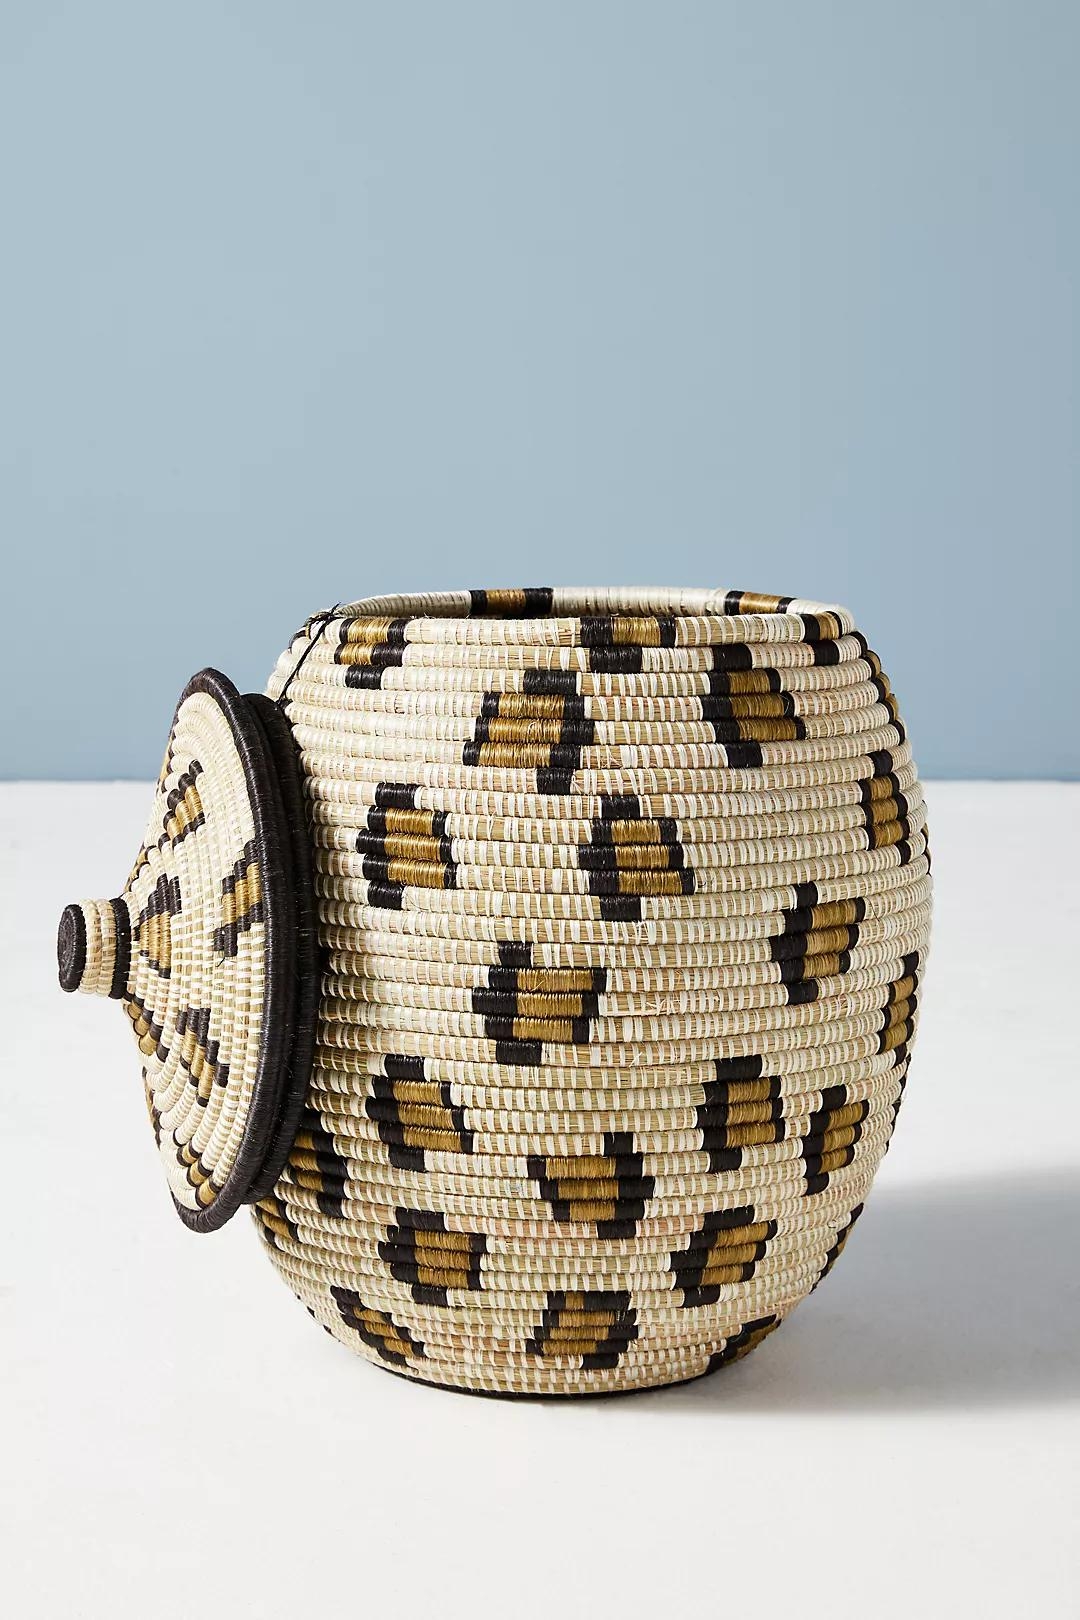 Cheetah Lidded Basket By All Across Africa, Beige, Large - Image 1